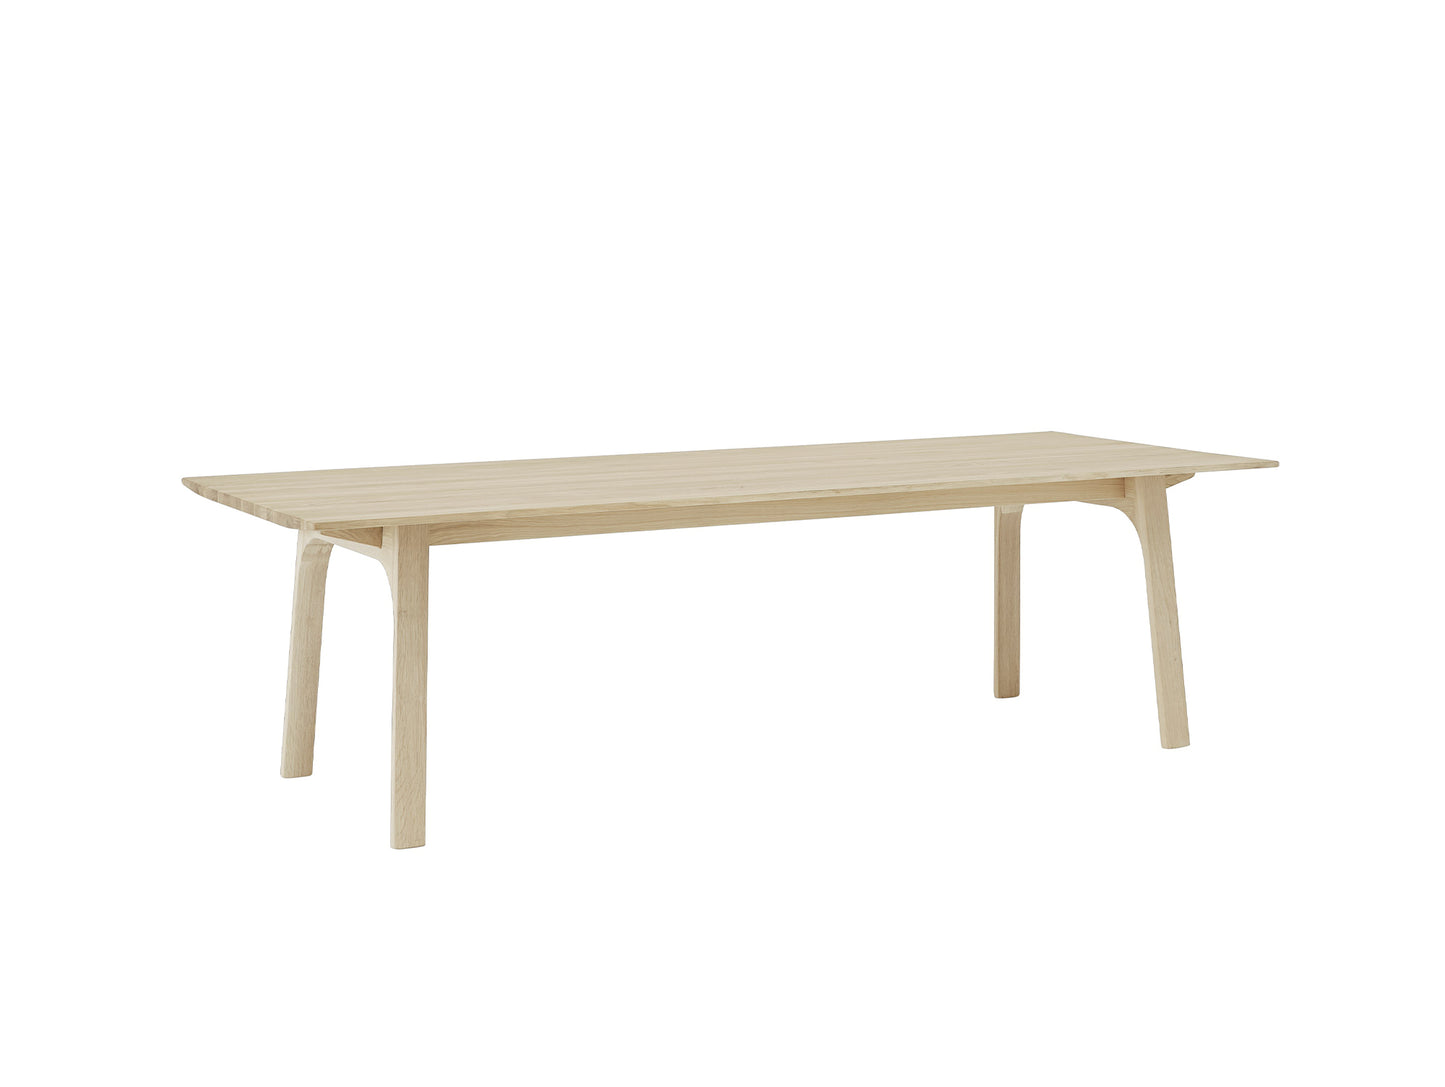 Earnest Extendable Dining Table